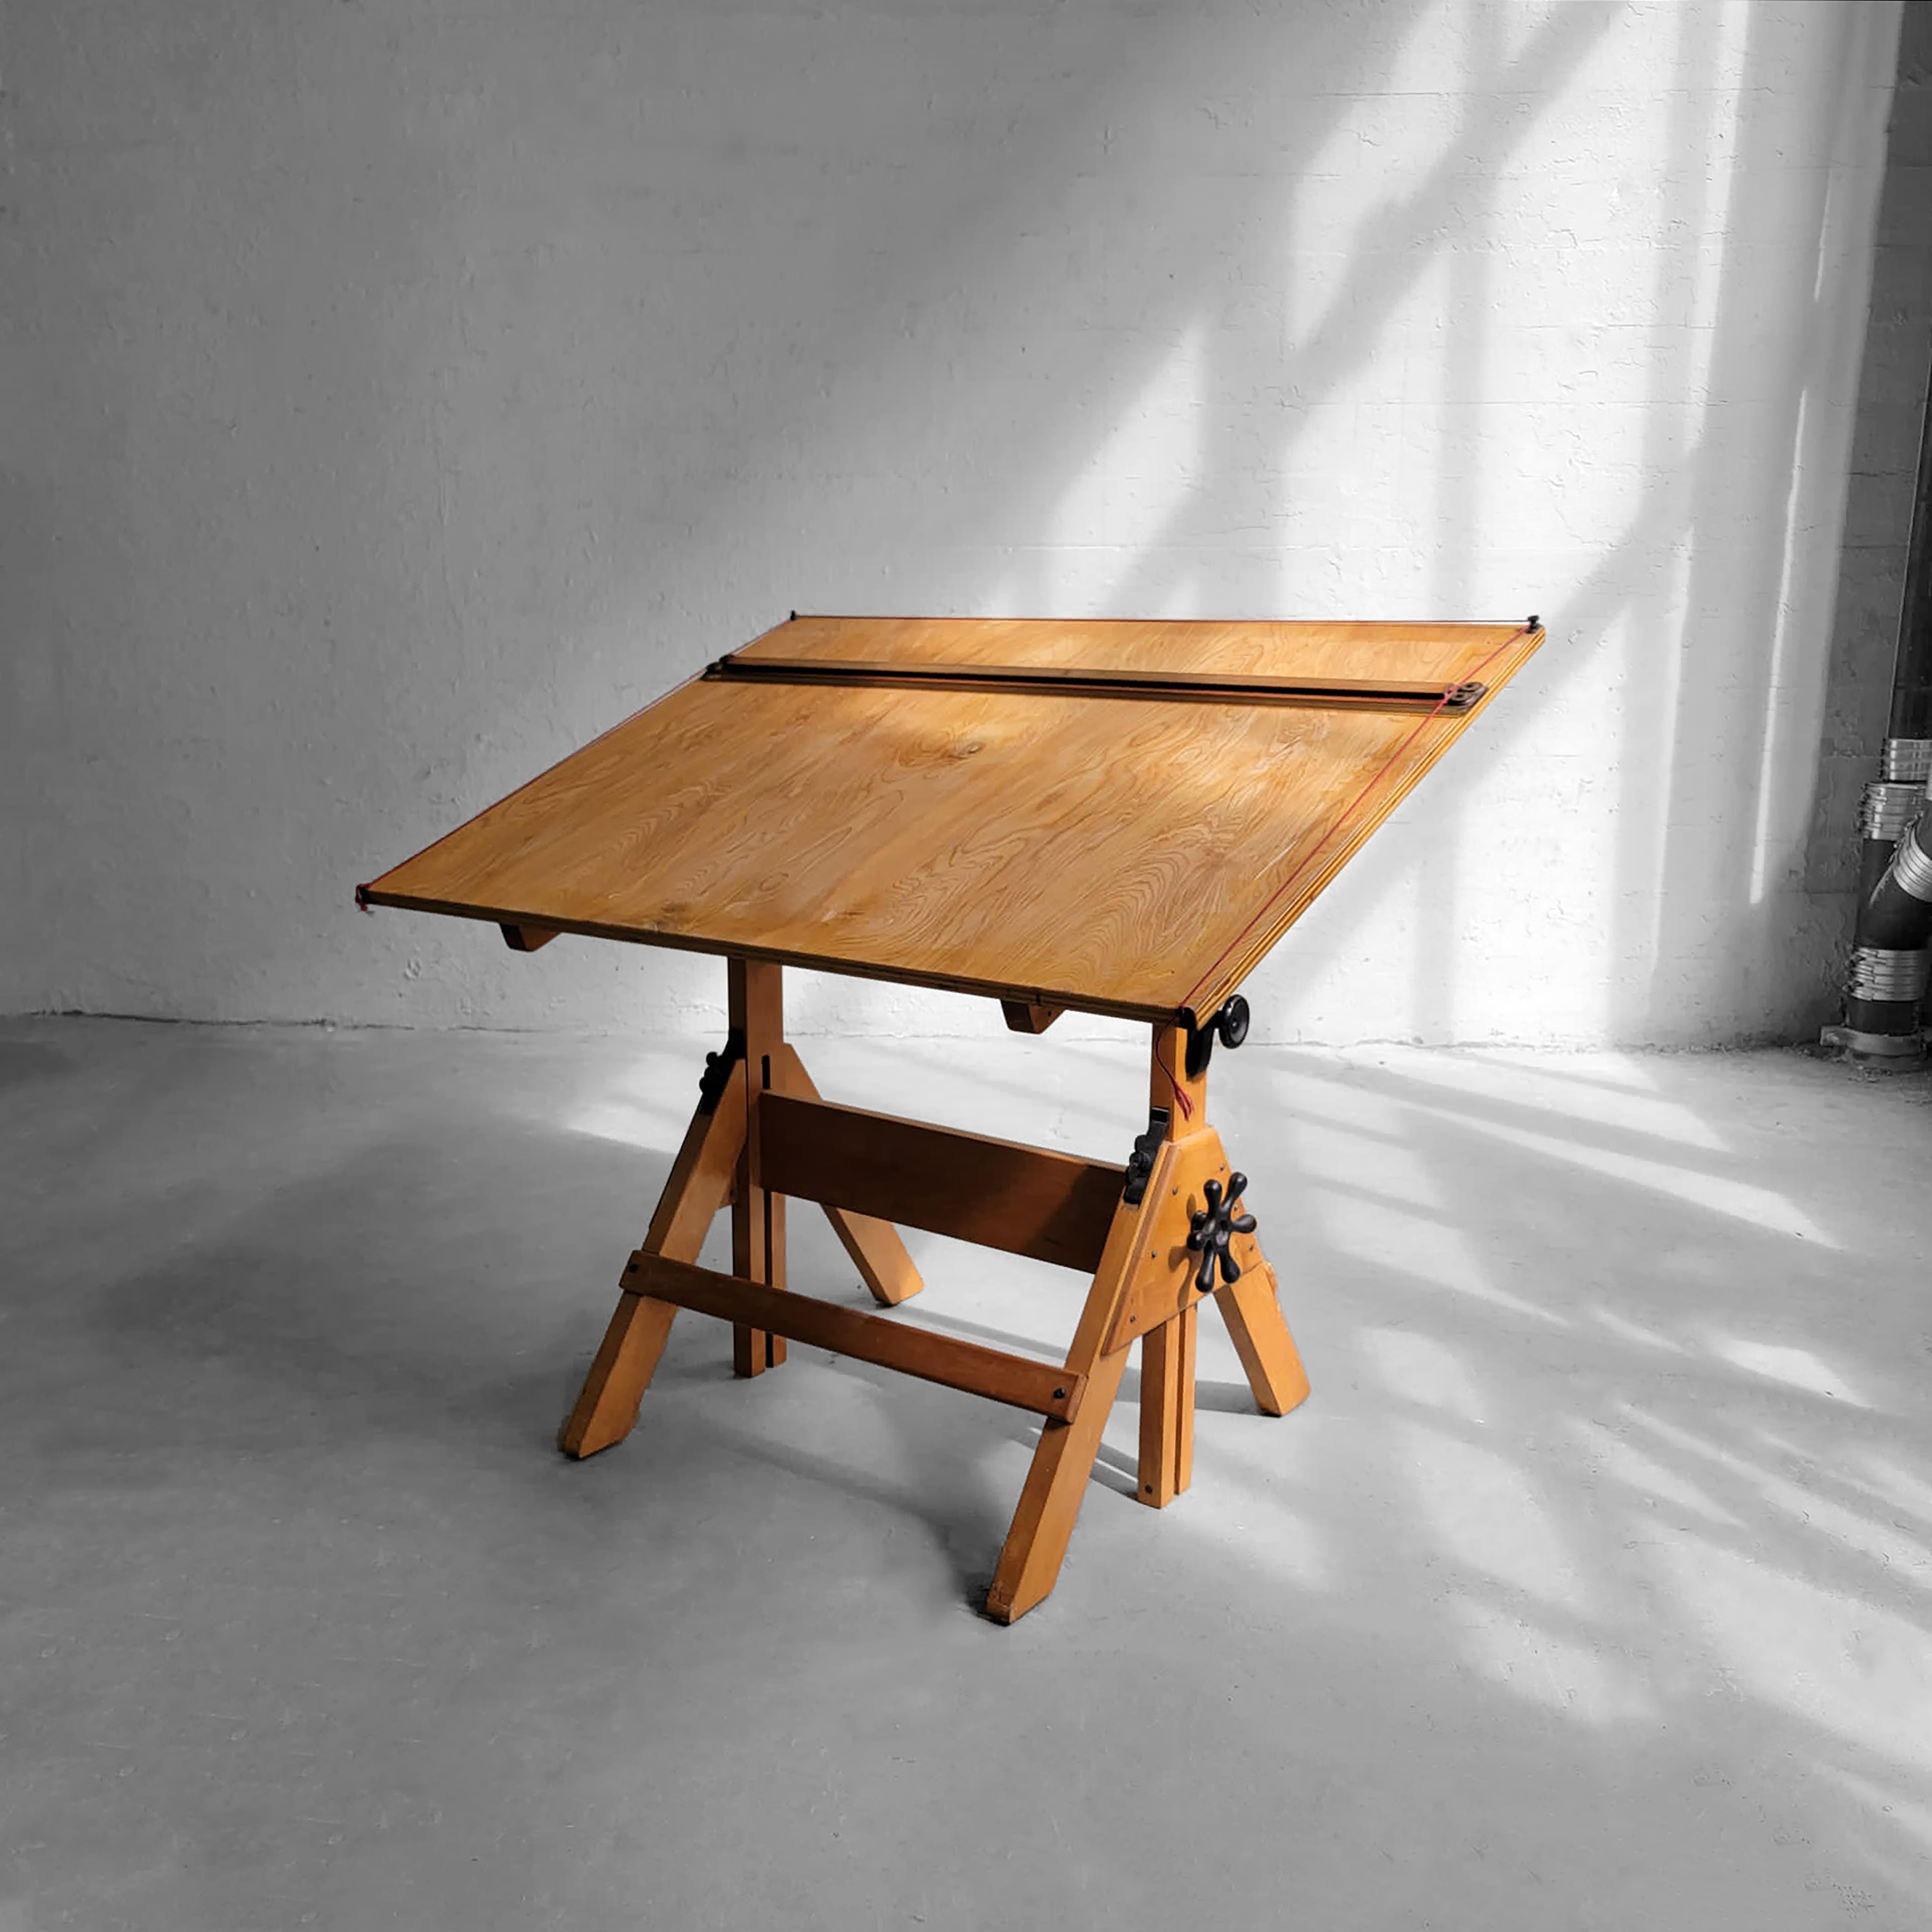 Industrial, midcentury, maple drafting table features cast iron hardware that adjusts the height and tilt of the table with attached adjustable straight edge. The table adjusts from 31 - 40 inches height with the top level. The top adjusts to almost